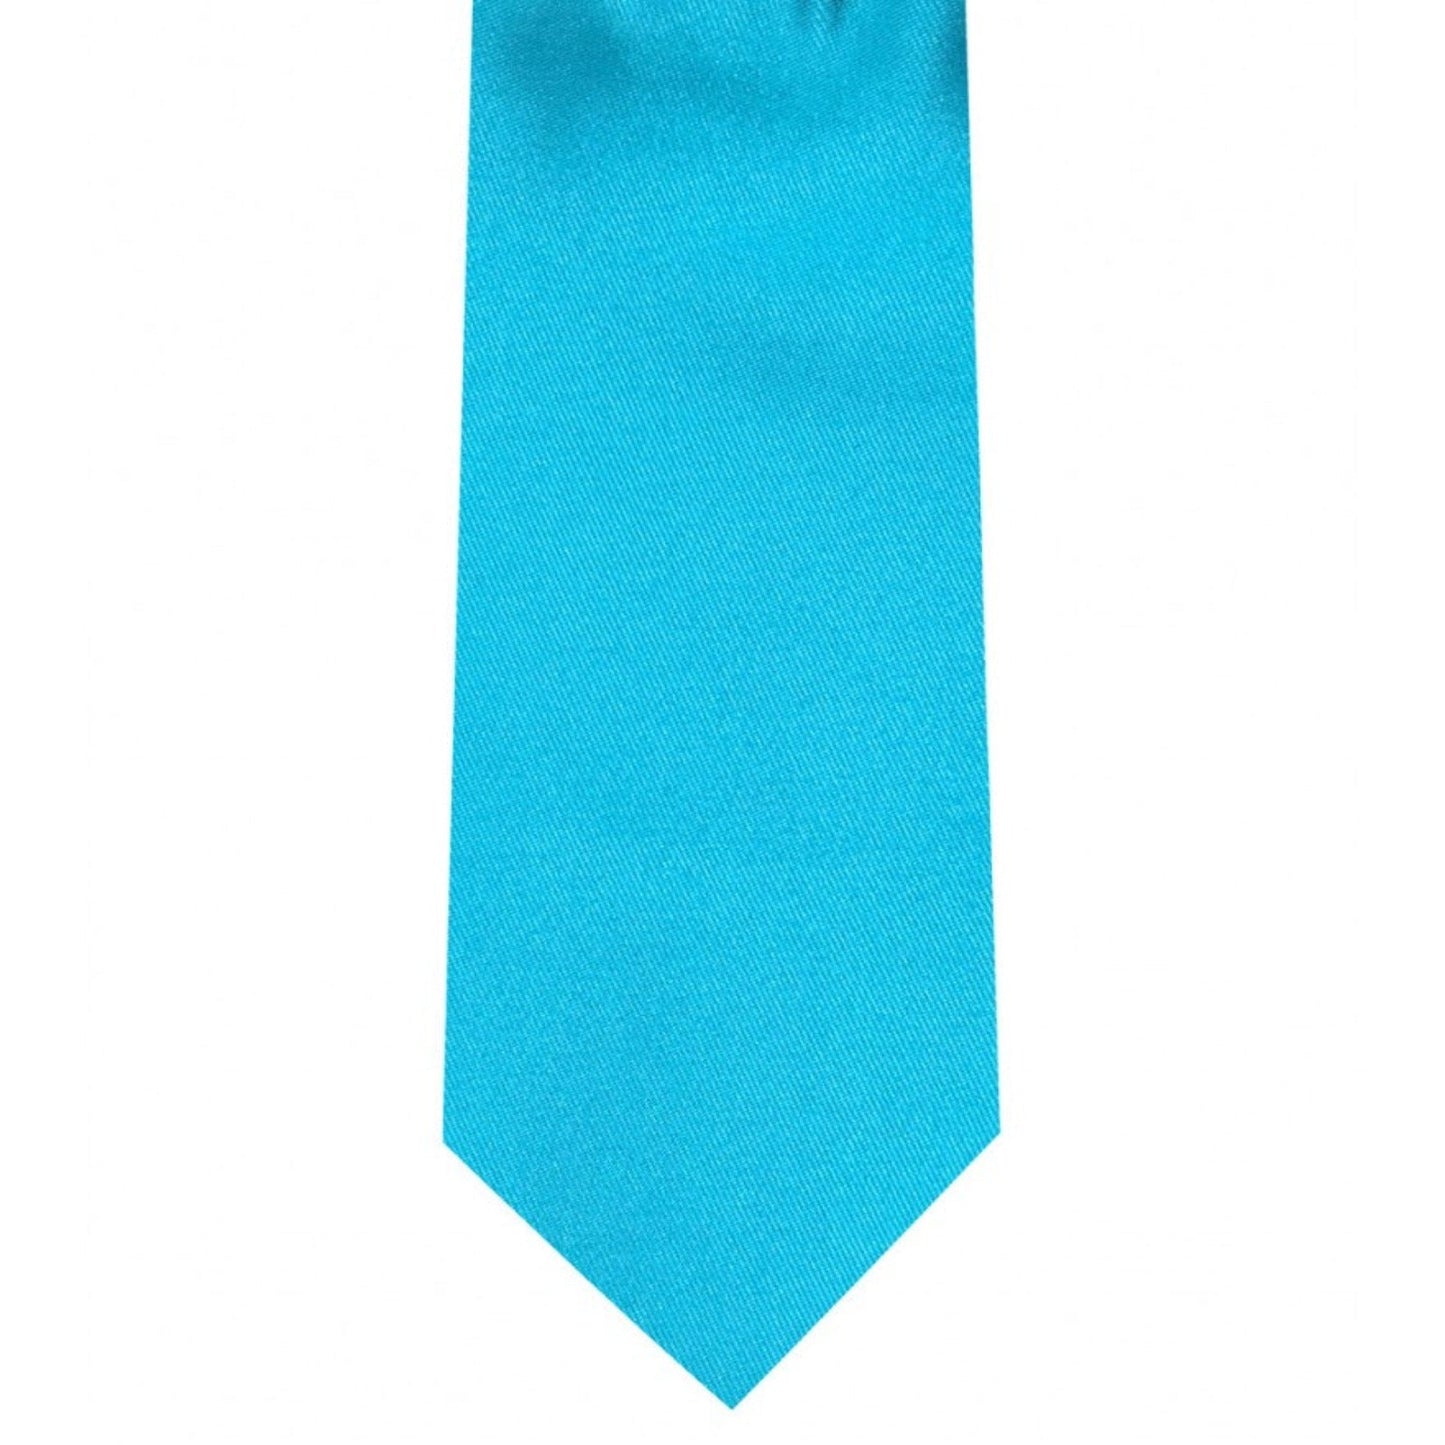 Classic Turquoise Tie Ultra Skinny tie width 2.25 inches With Matching Pocket Square | KCT Menswear